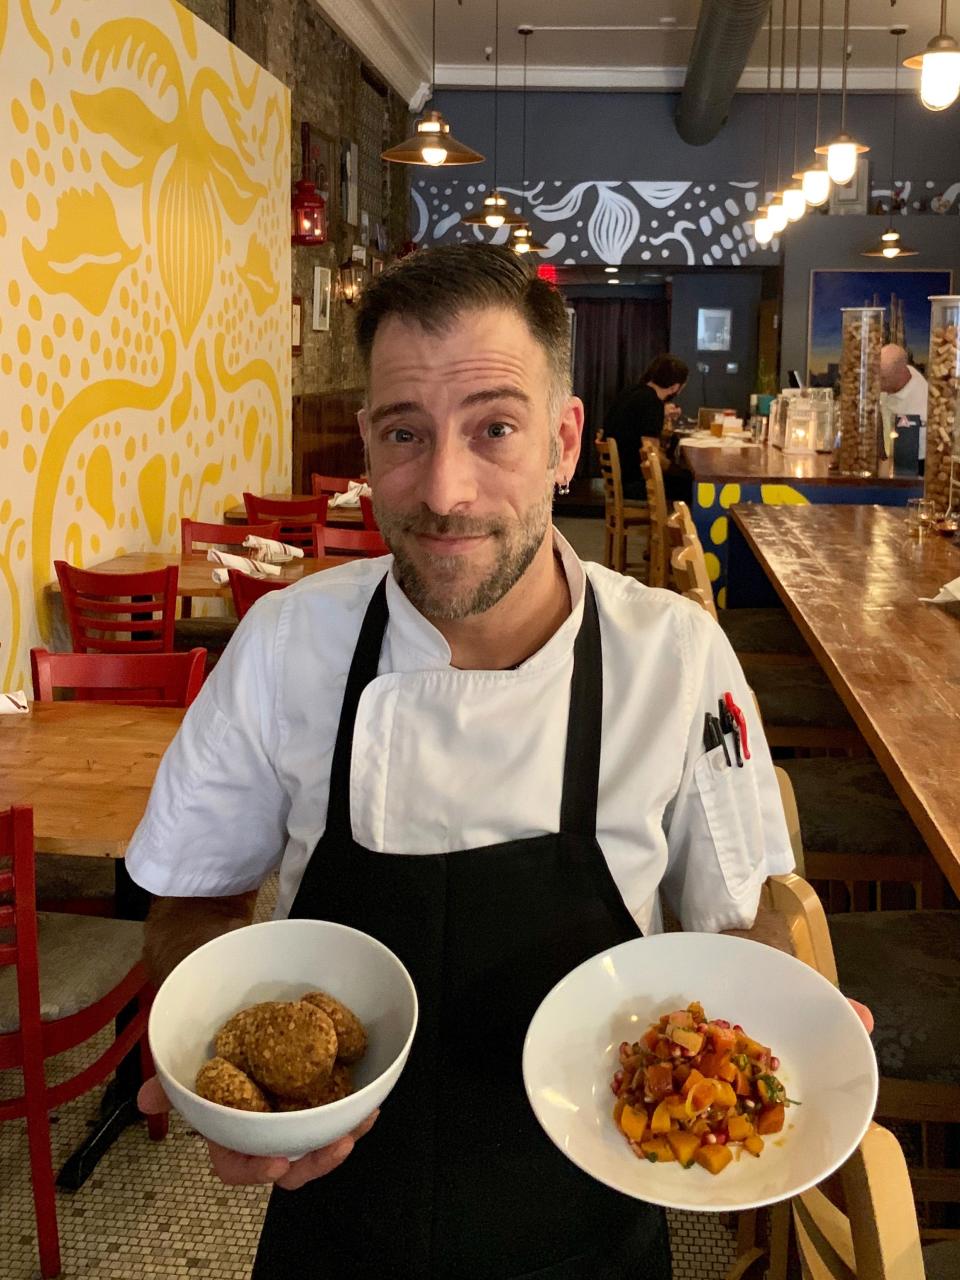 Gregory León is the chef/owner of Amilinda, 315 E. Wisconsin Ave.